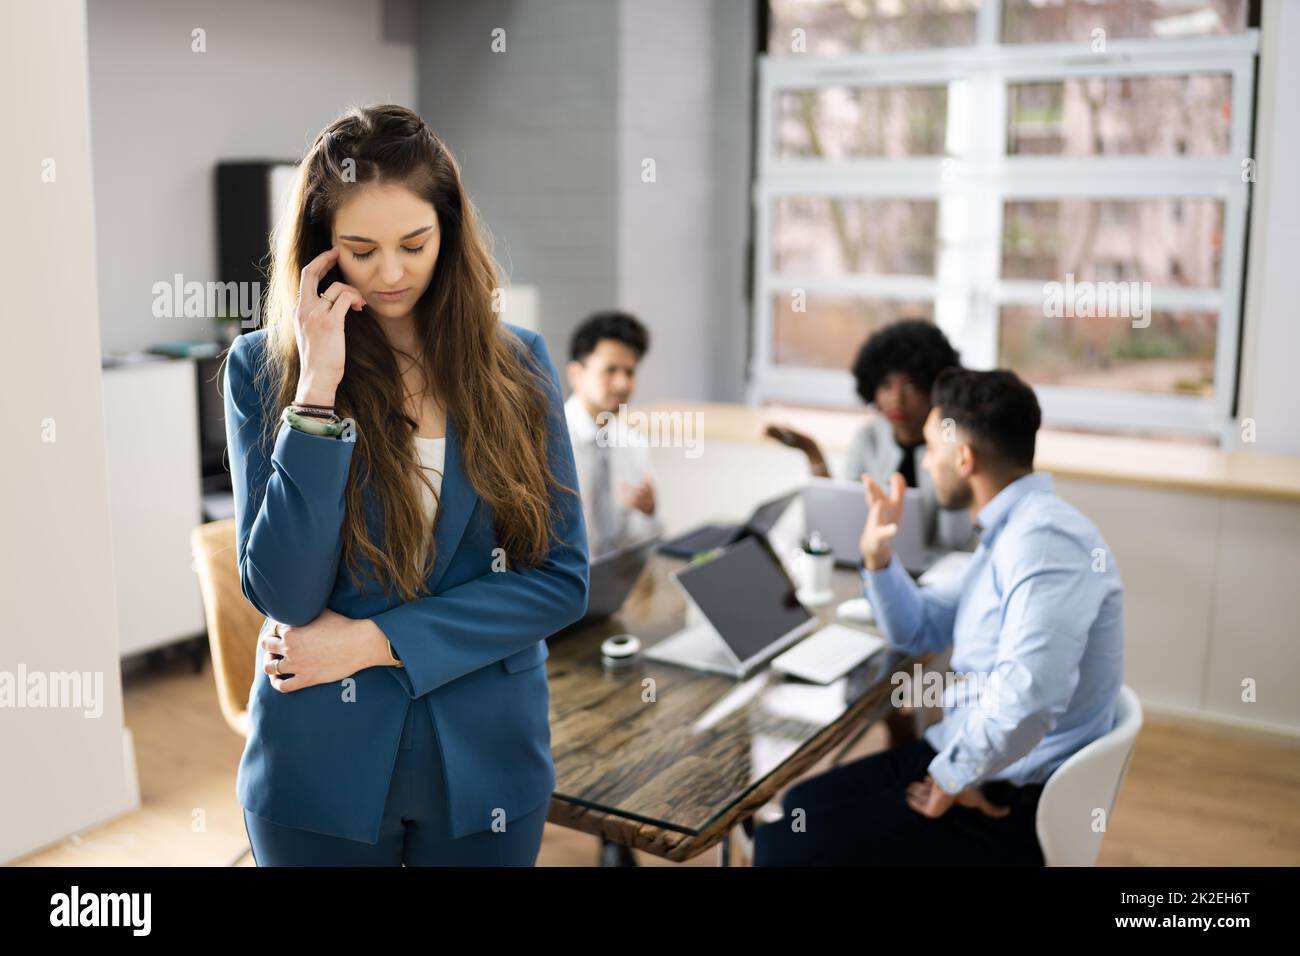 Stressed Female Colleague And Other Workers Bullying Stock Photo